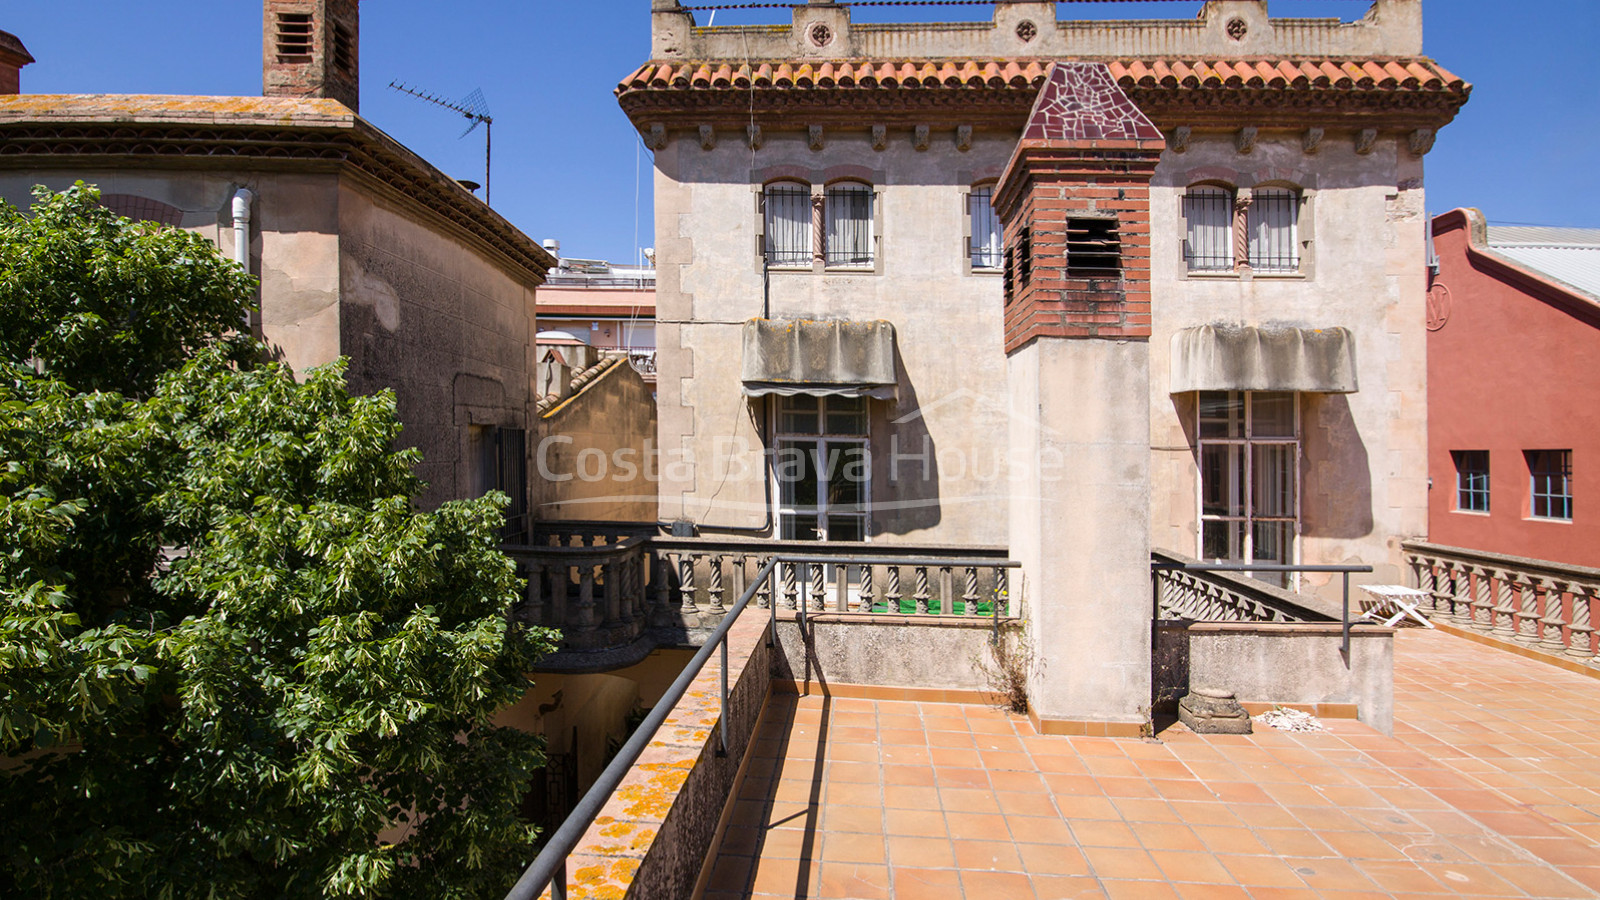 Very exclusive modernist villa for sale in the centre of Palafrugell